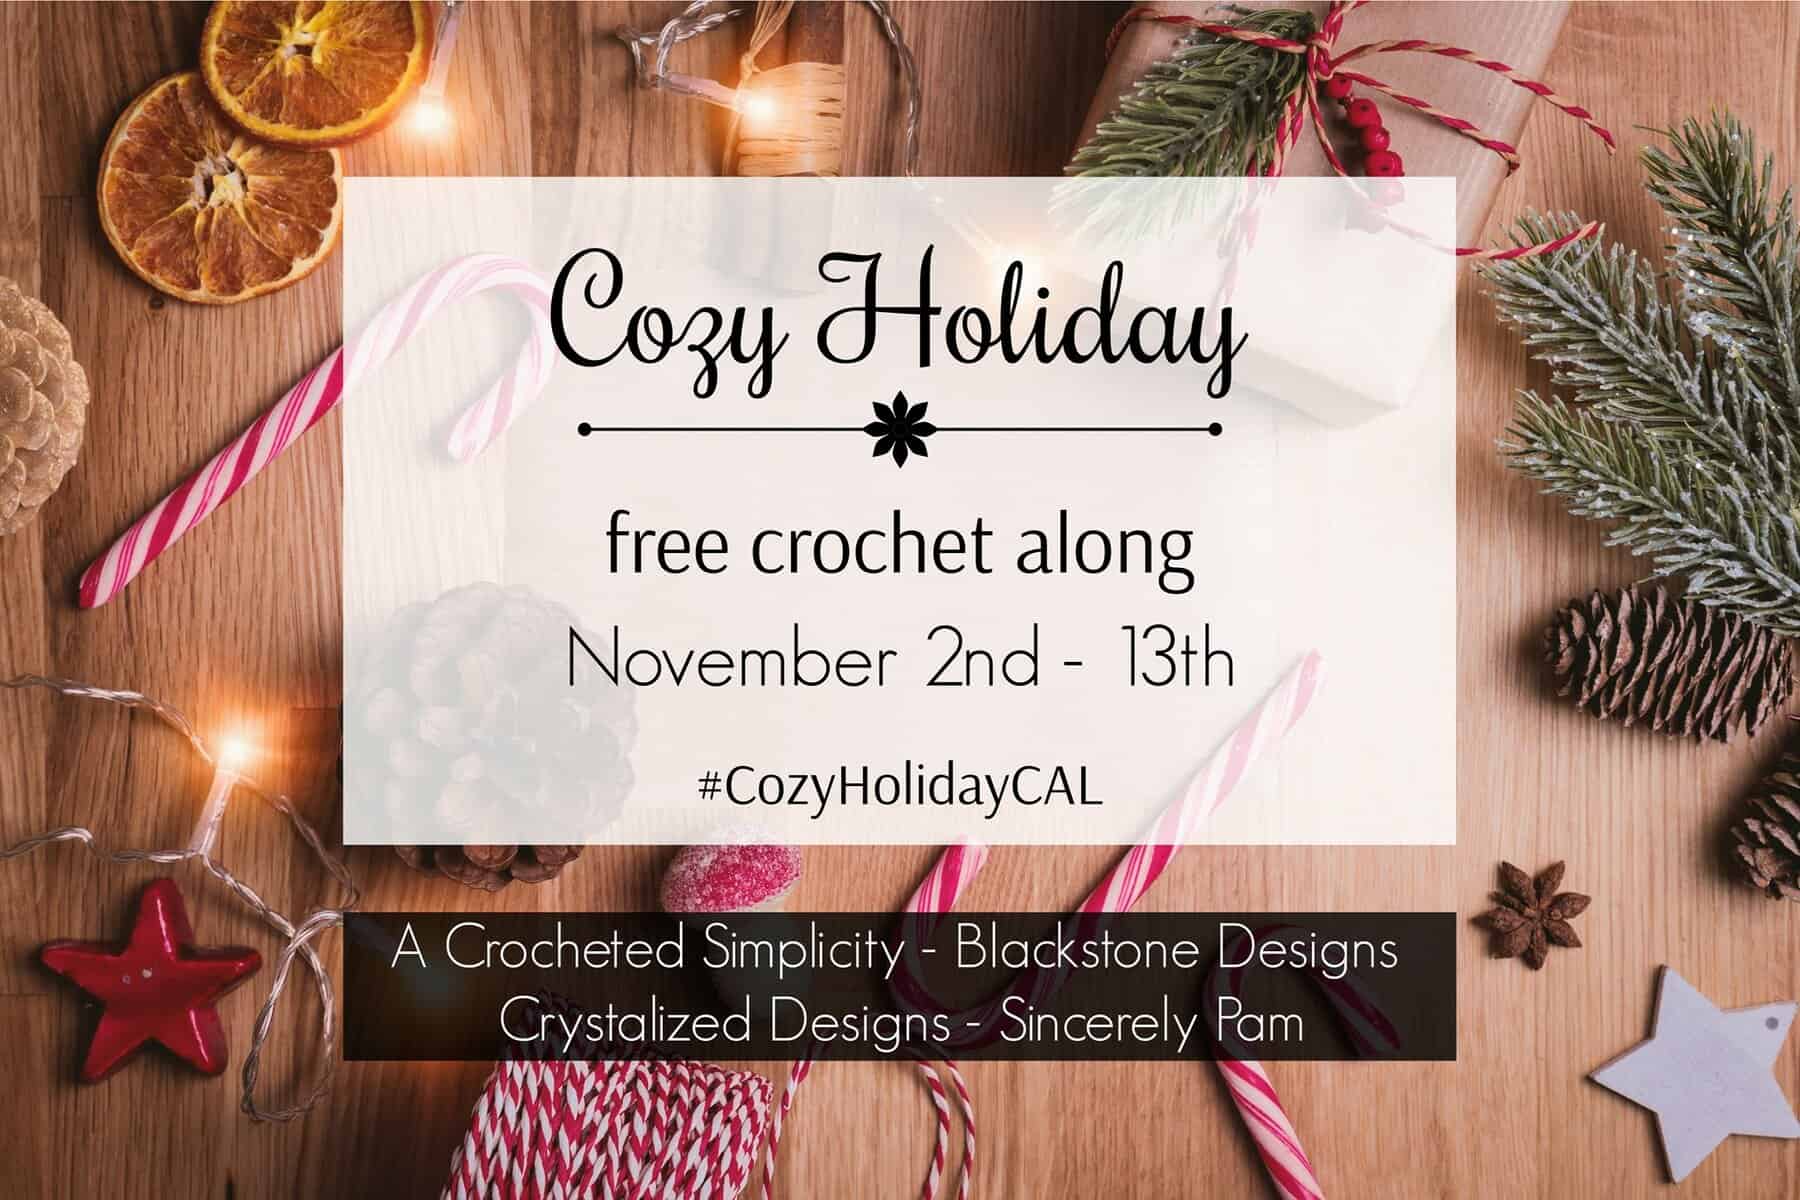 Join us for the Cozy Holiday Crochet Along - A Free Crochet Along with 4 designer hosts #crochetalong #christmascrochetalong #freecrochetpatt ern #christmascrochet #CozyHolidayCAL